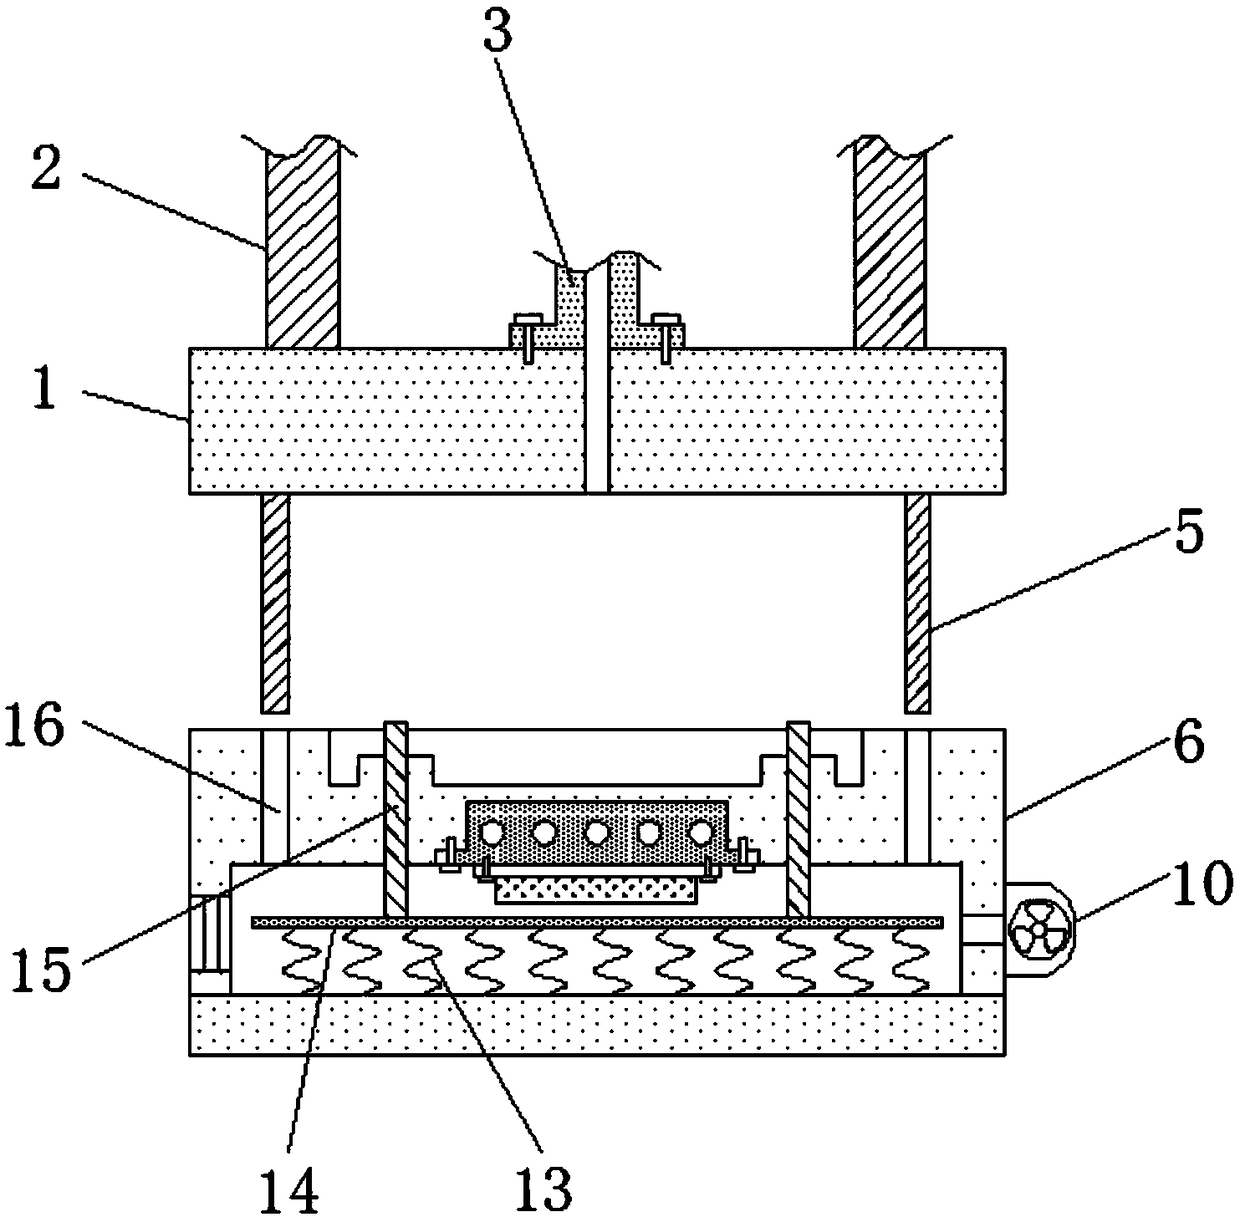 Injection mold capable of achieving fast cooling and demolding